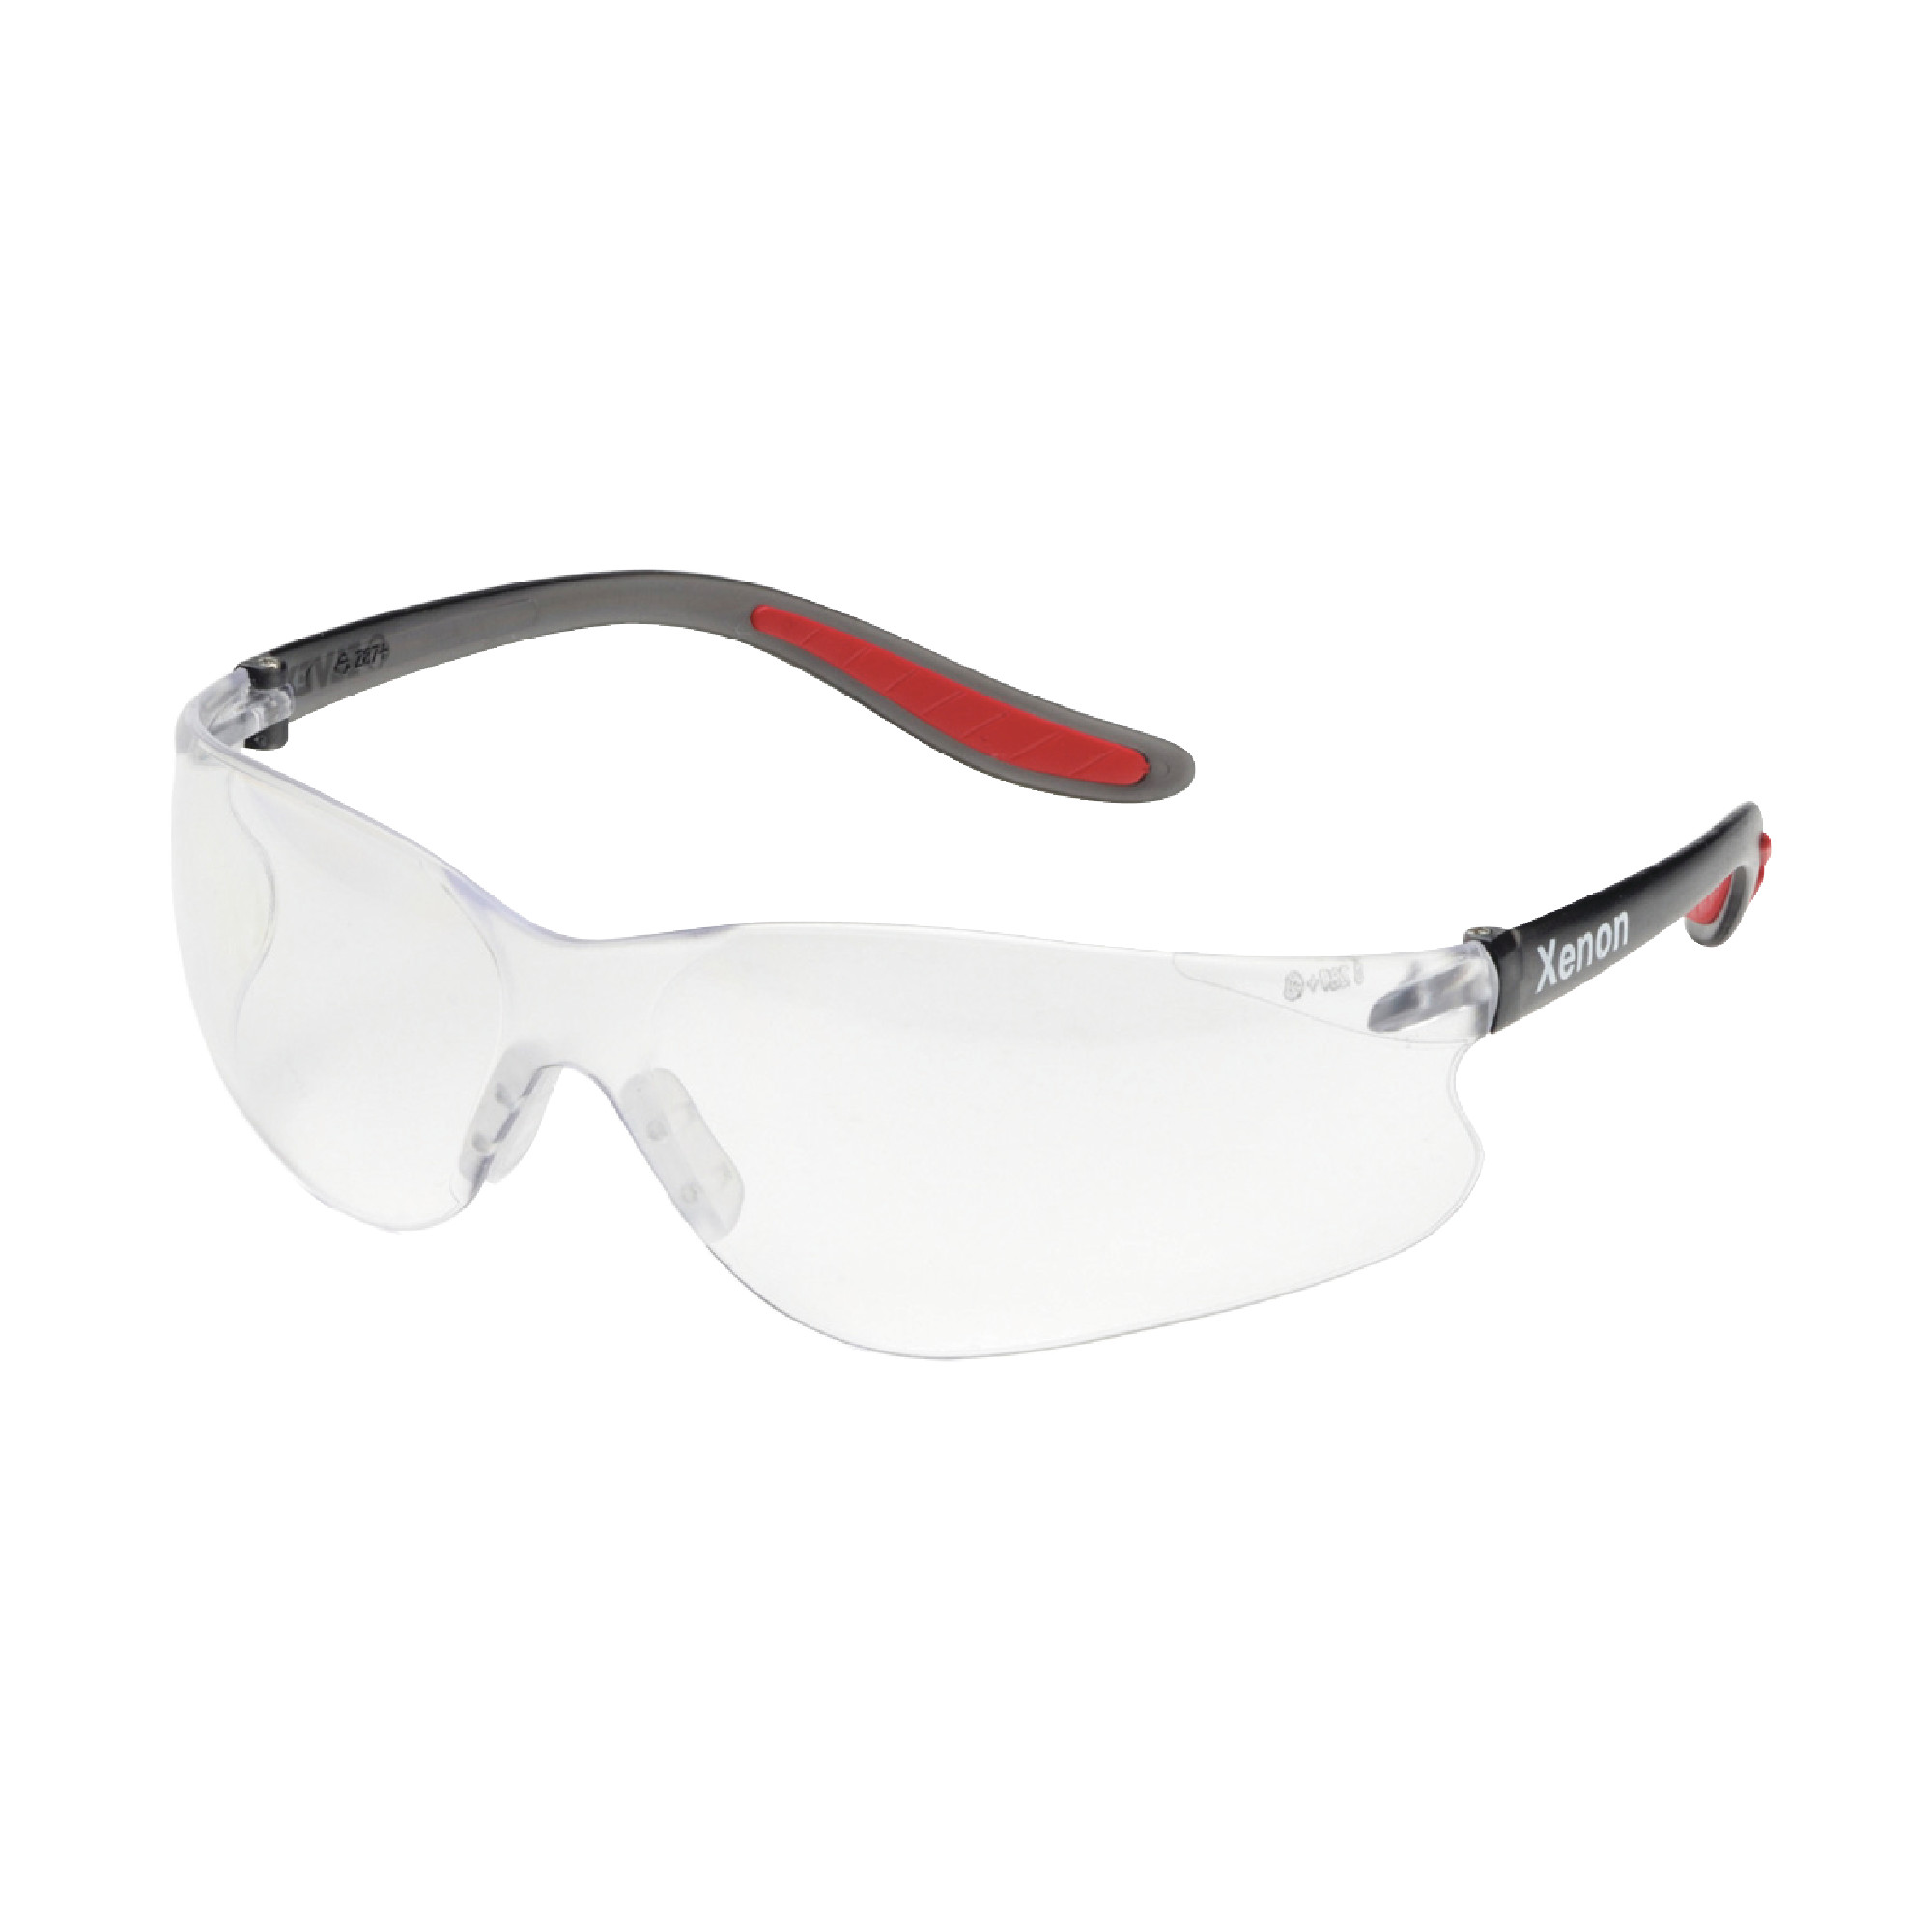 ELVEX Xenon Clear Lens Safety Glasses